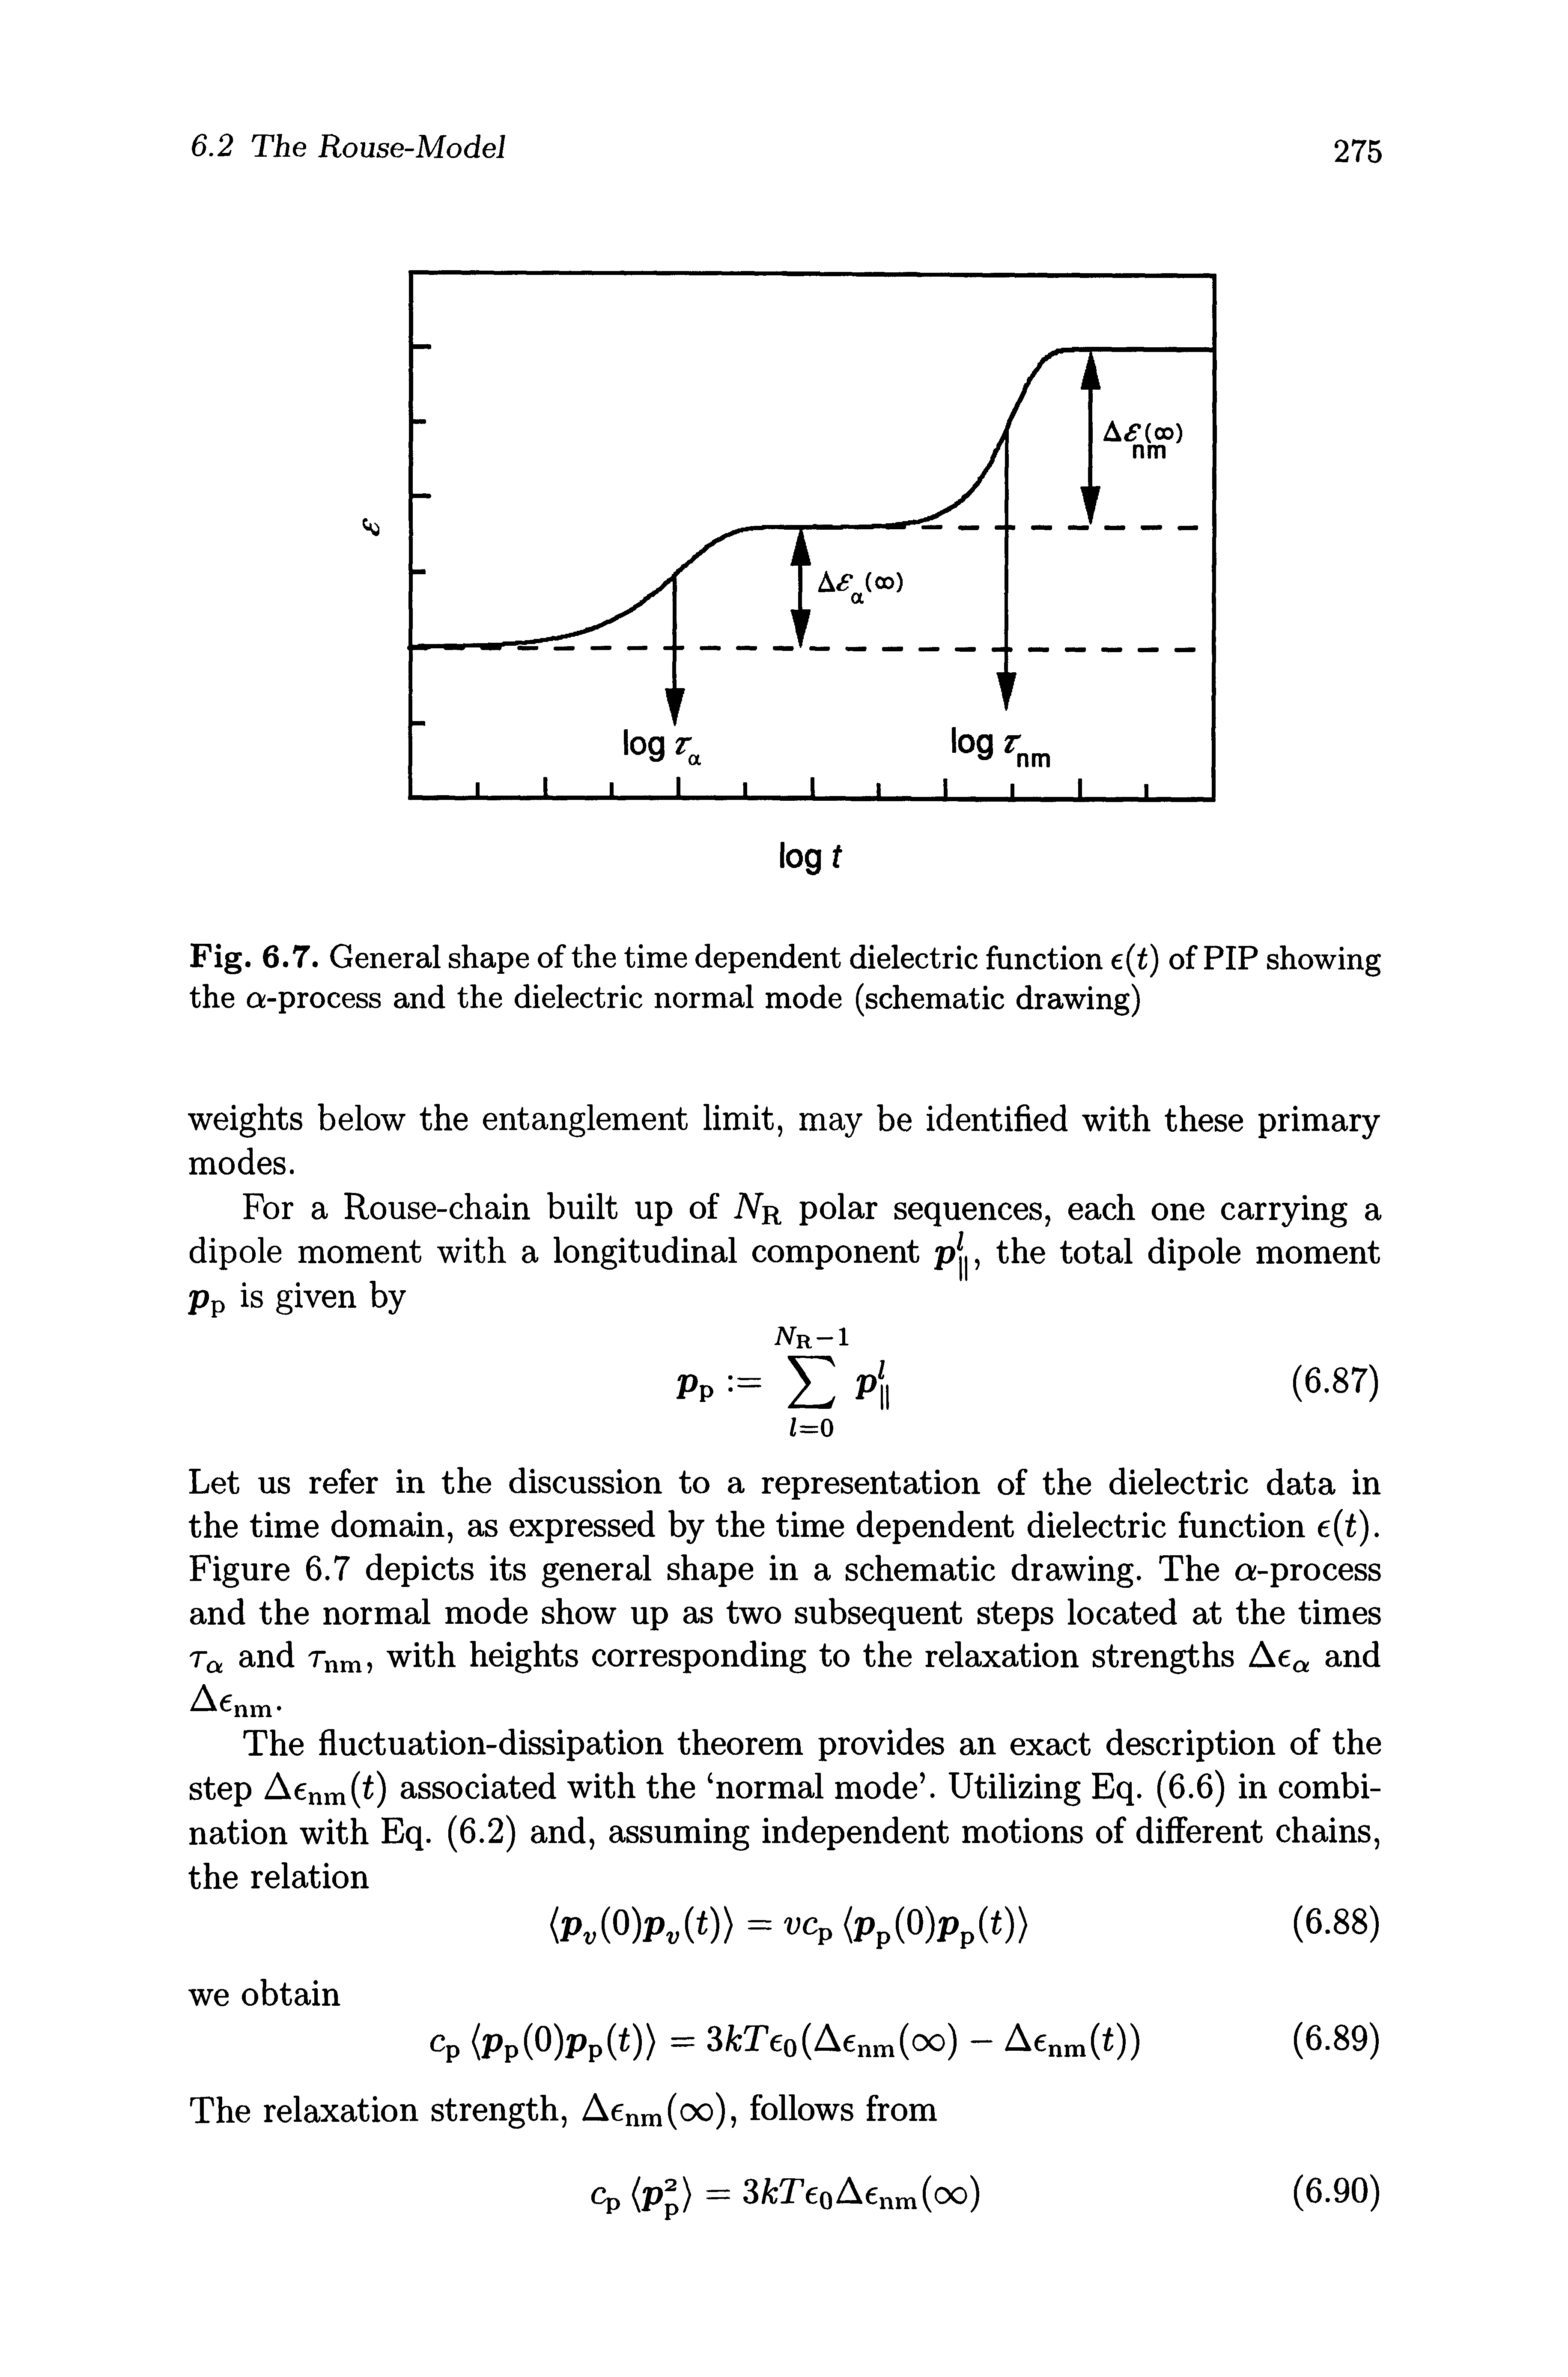 Fig. 6.7. General shape of the time dependent dielectric function e(t) of PIP showing the a-process and the dielectric normal mode (schematic drawing)...